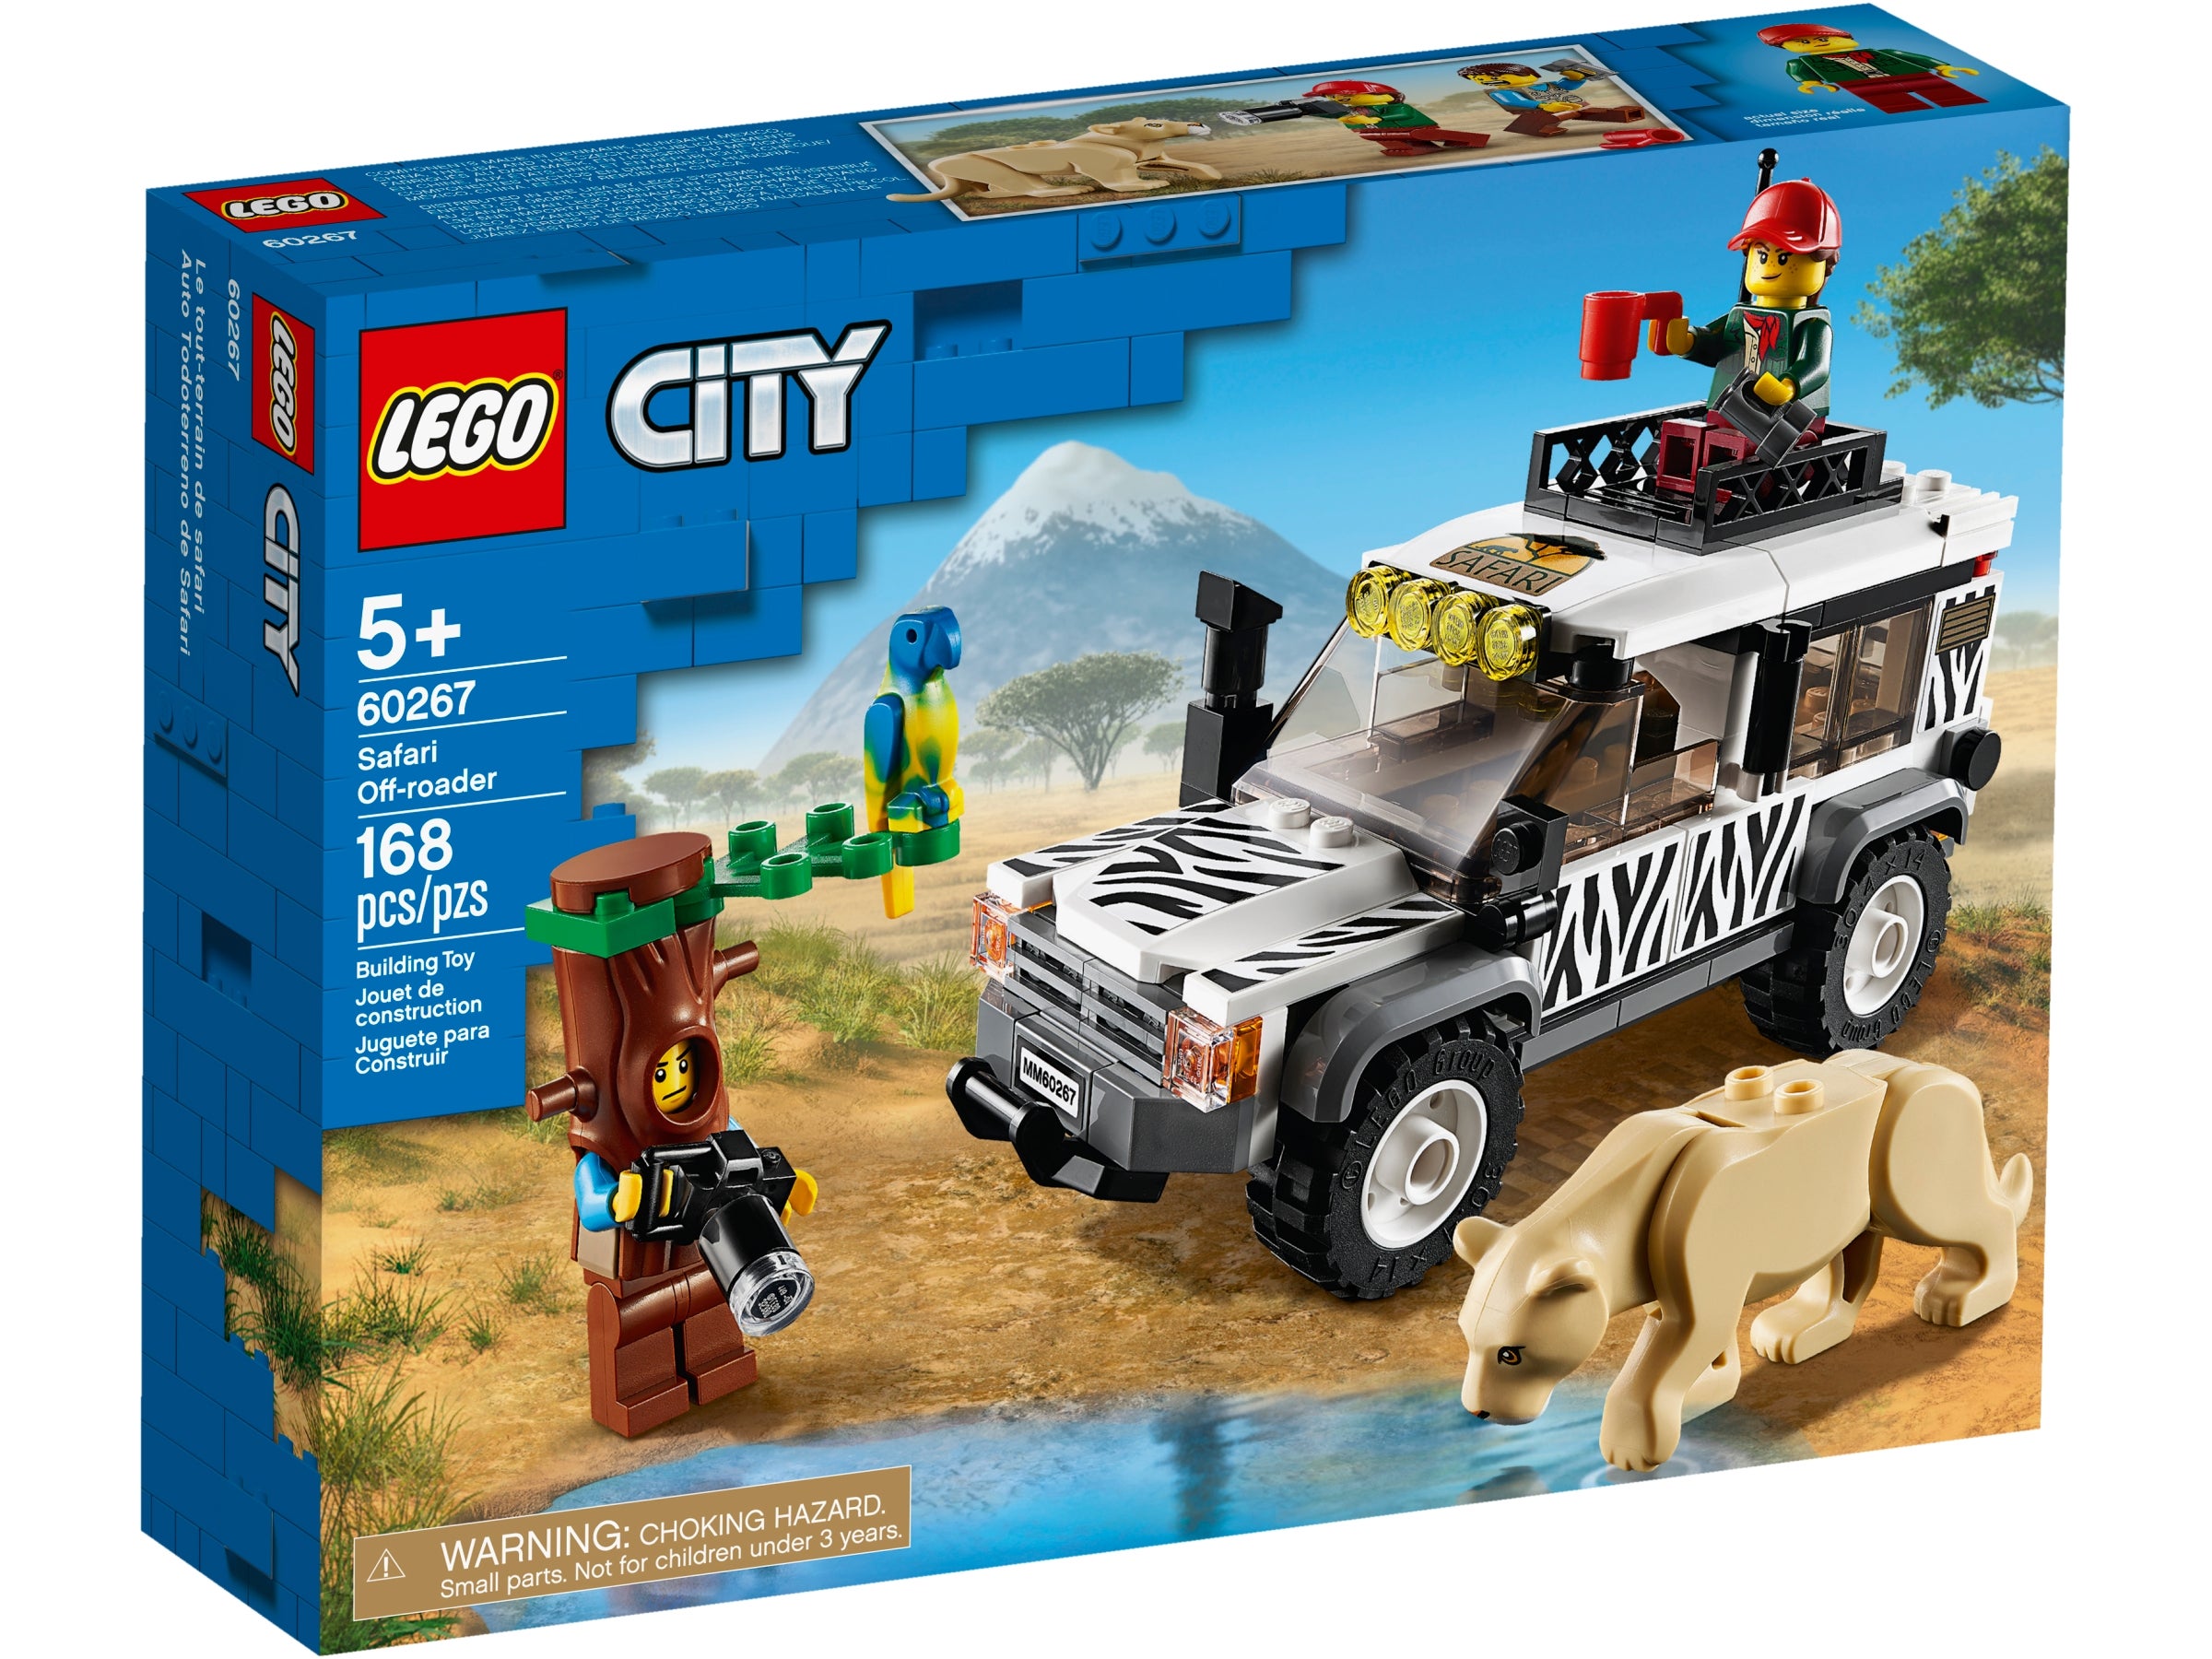 60267 for sale online LEGO Safari Off-Roader City Great Vehicles